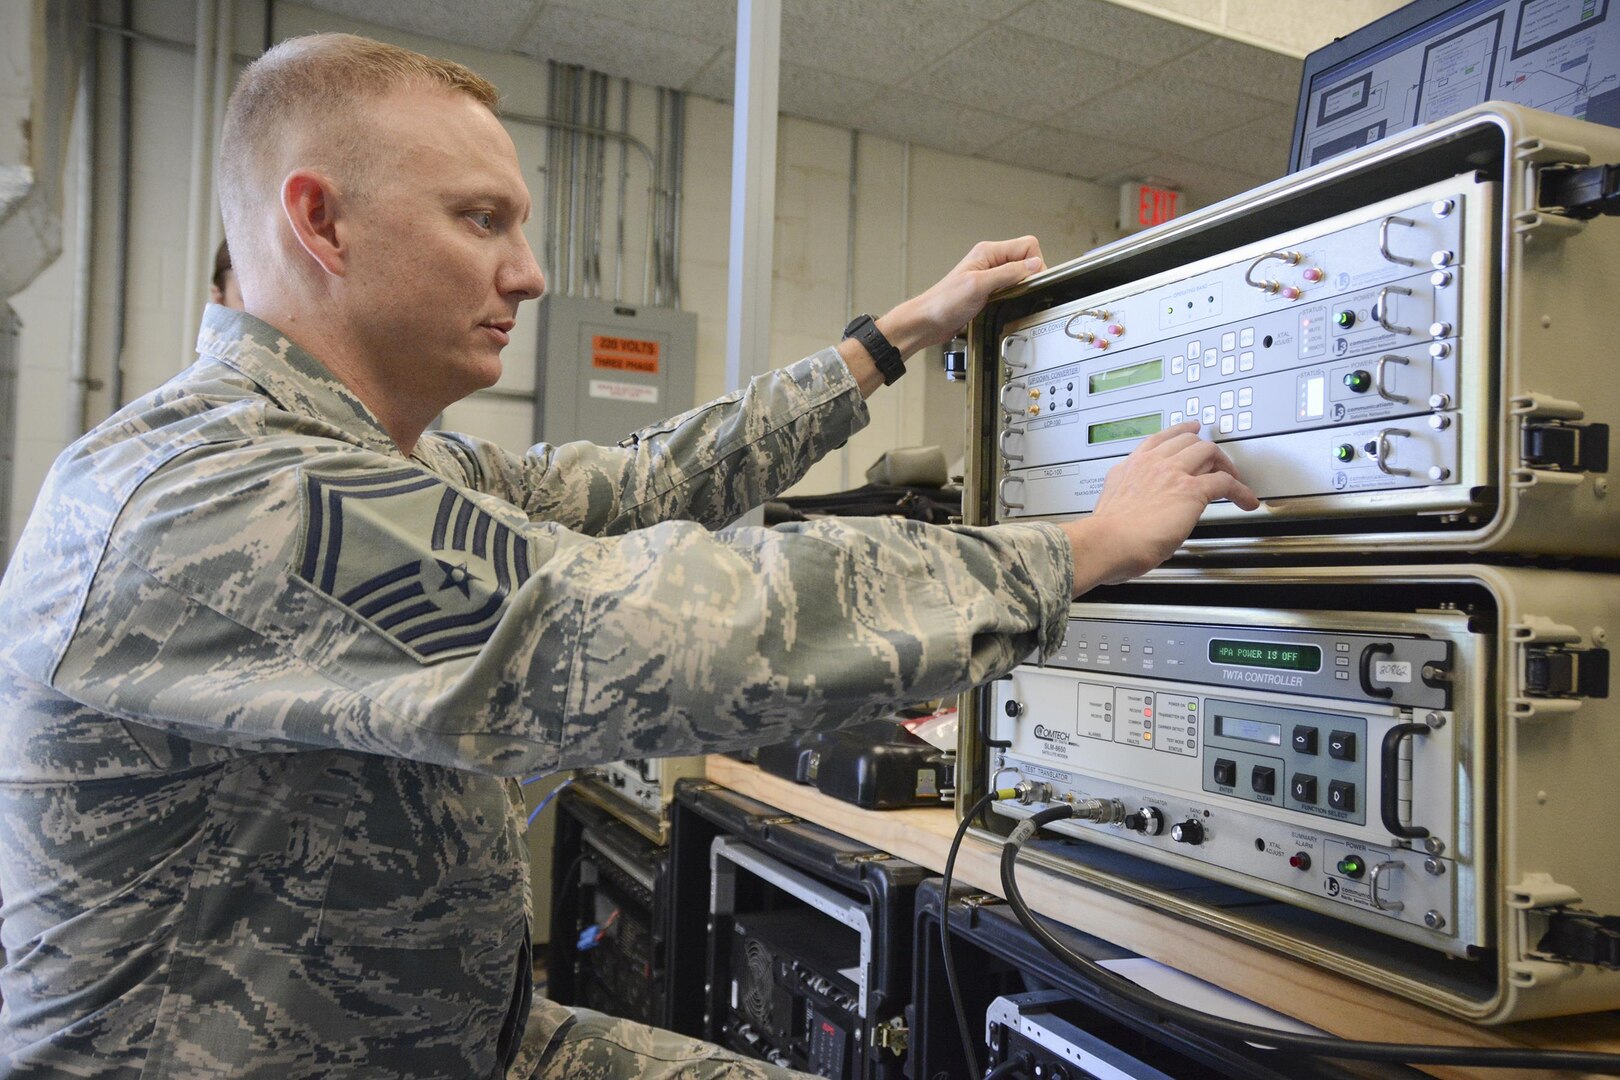 Senior Master Sgt. Mark Farmer, a space systems operations superintendent assigned to the 114th Space Control Squadron at Patrick AFB, Florida, monitors satellite networking equipment June 3, 2016. Farmer is the Air National Guard's 2016 Outstanding Senior NCO of the Year and one of the U.S. Air Force's 12 Outstanding Airmen of the Year. 